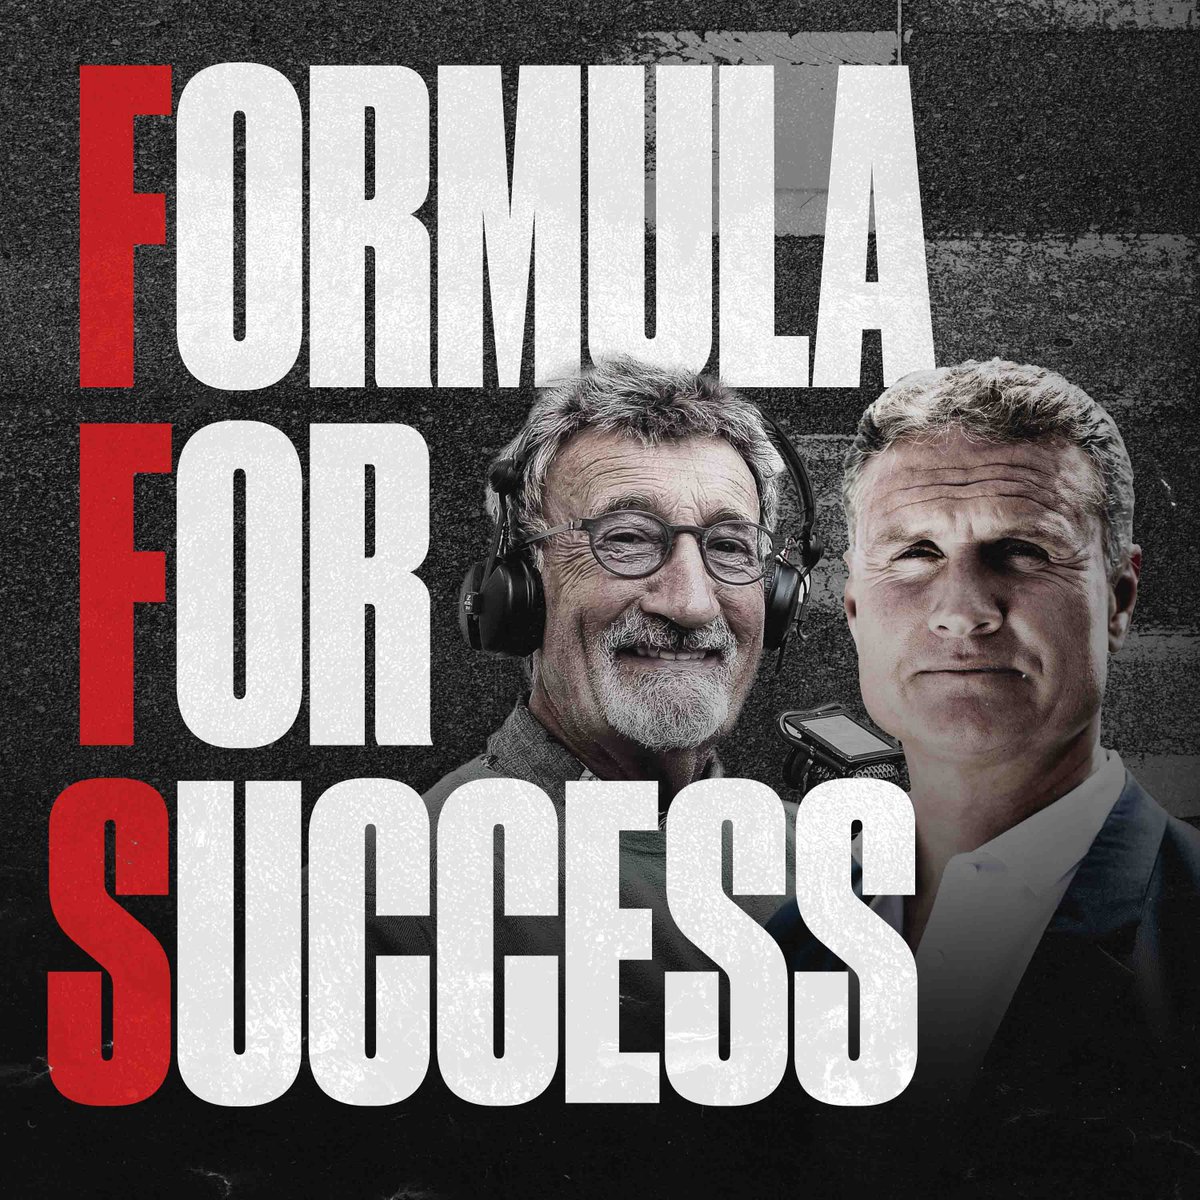 Just what the world needs... another #F1 podcast! But sometimes they save the best for last. Eddie Jordan + @therealdcf1 are back! Ep 1 includes some big predictions: Alonso winning races and Toto moving on... Search 'Formula For Success' where you usually listen #BahrainGP